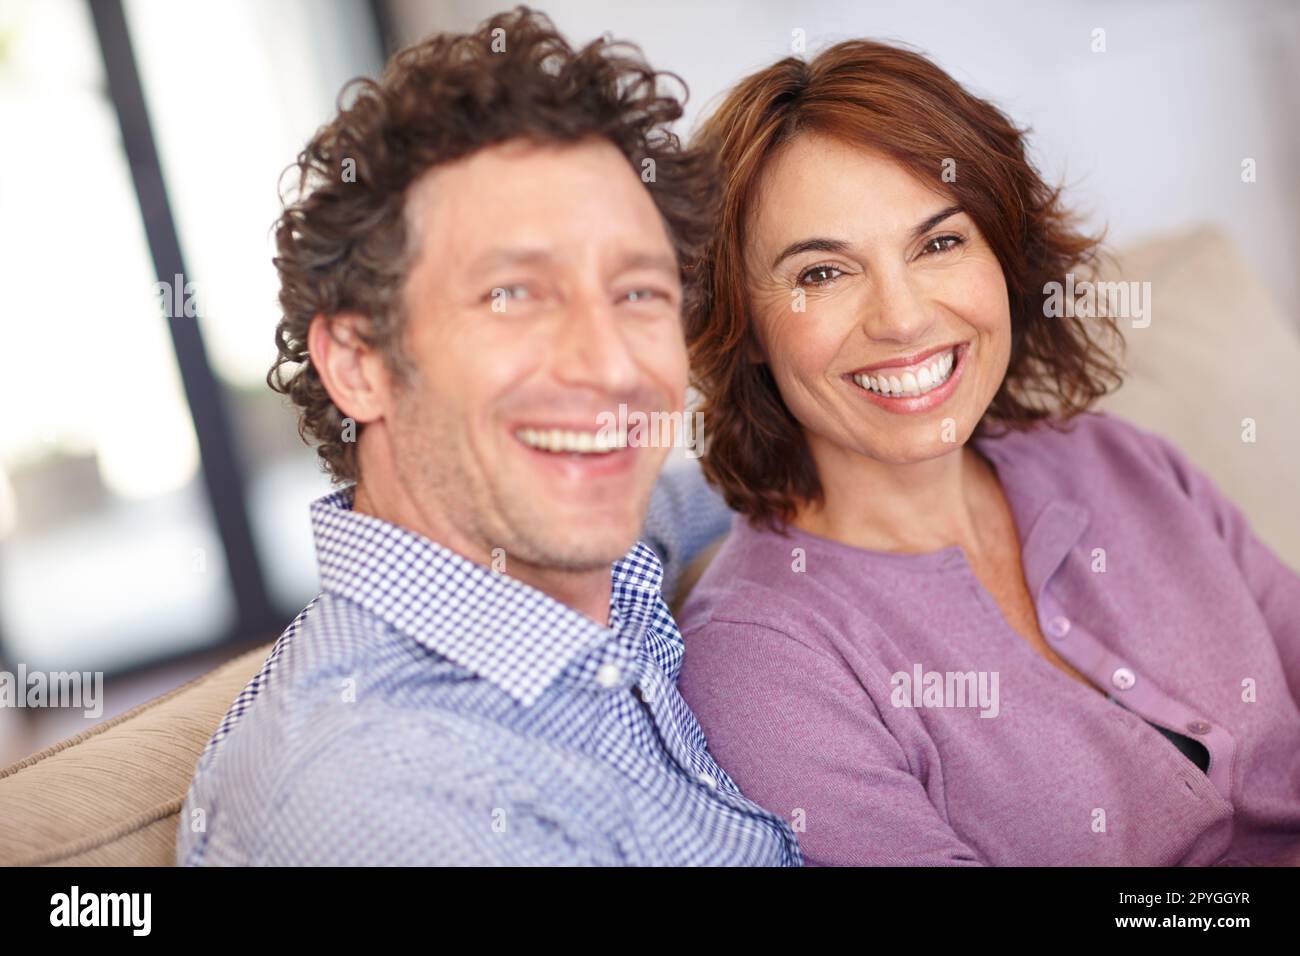 Im luck to be in love with my best friend. Portrait of a happy couple at home. Stock Photo